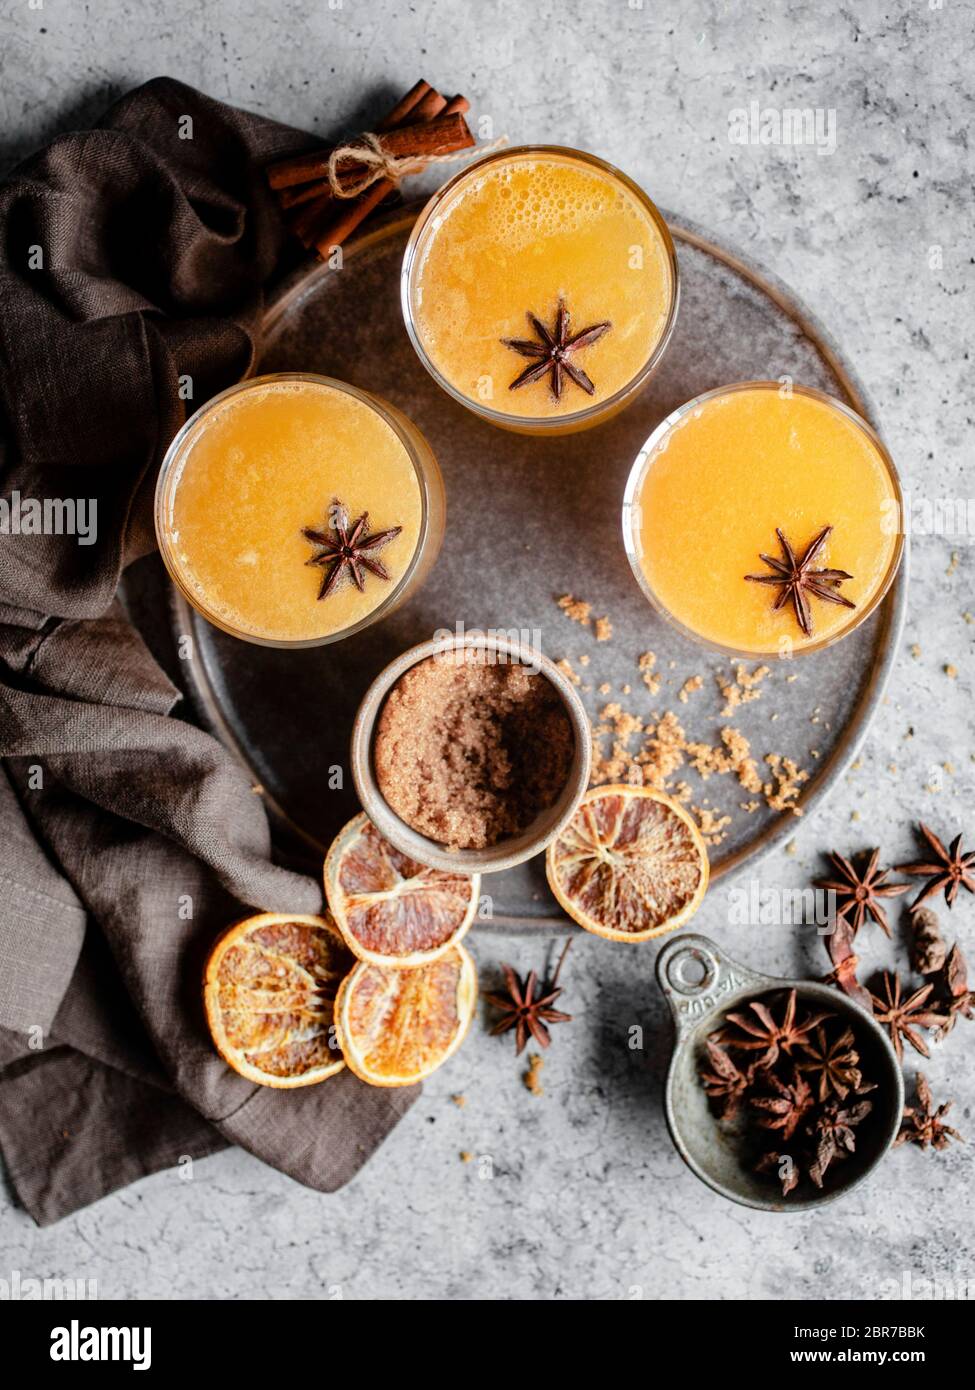 Overhead shot of three glasses of an orange spiced drink on a silver tray, garnished with star anise and surrounded by blood oranges, cinnamon sticks, Stock Photo